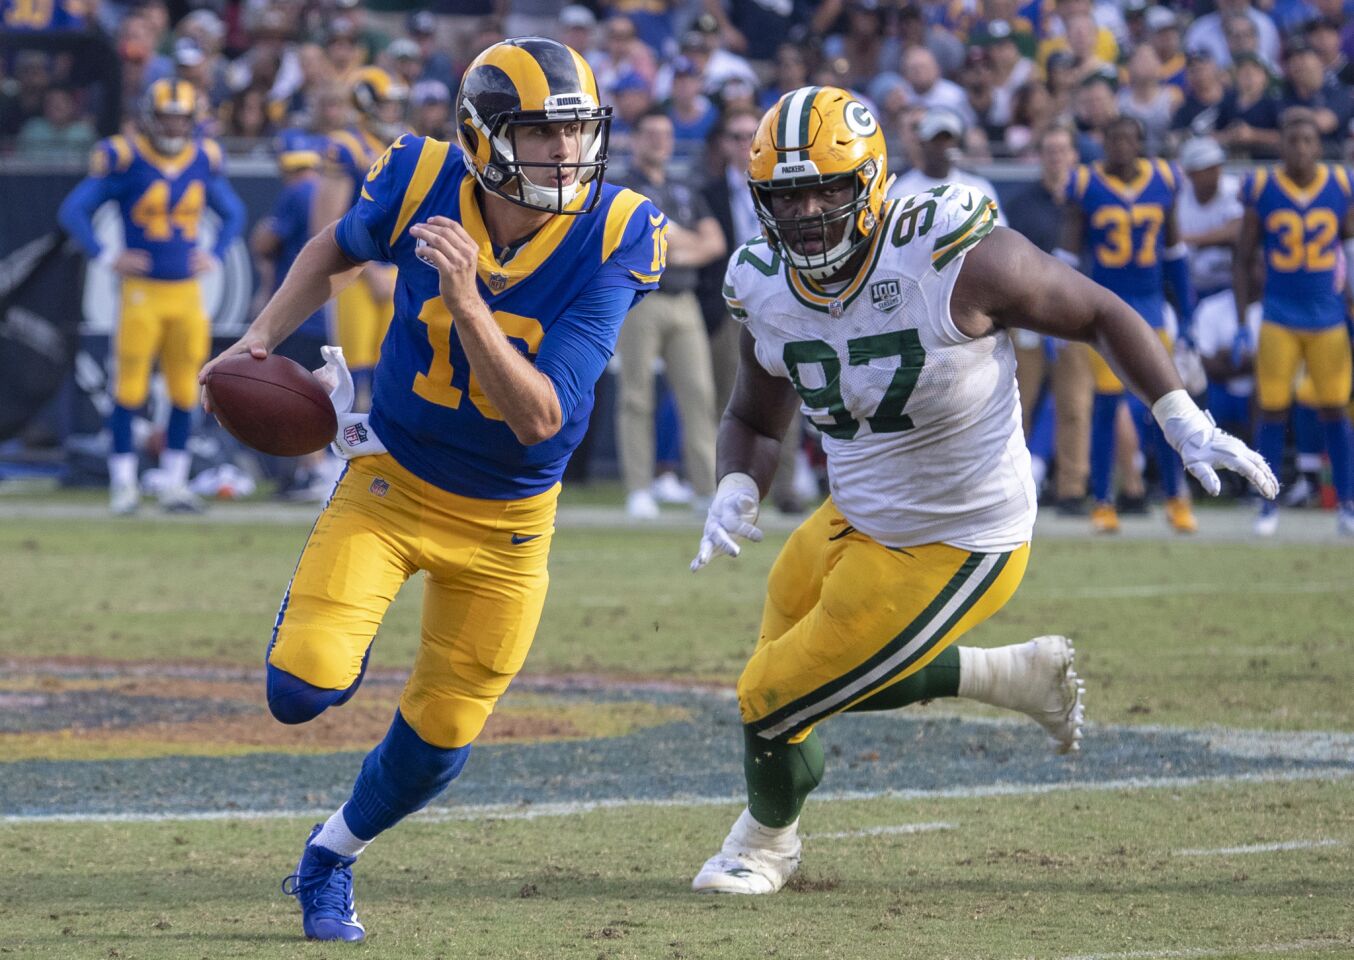 Rams quarterback Jared Goff, left, is chased out of the pocket by Green Bay Packers' Kenney Clark at the Coliseum on Sunday.